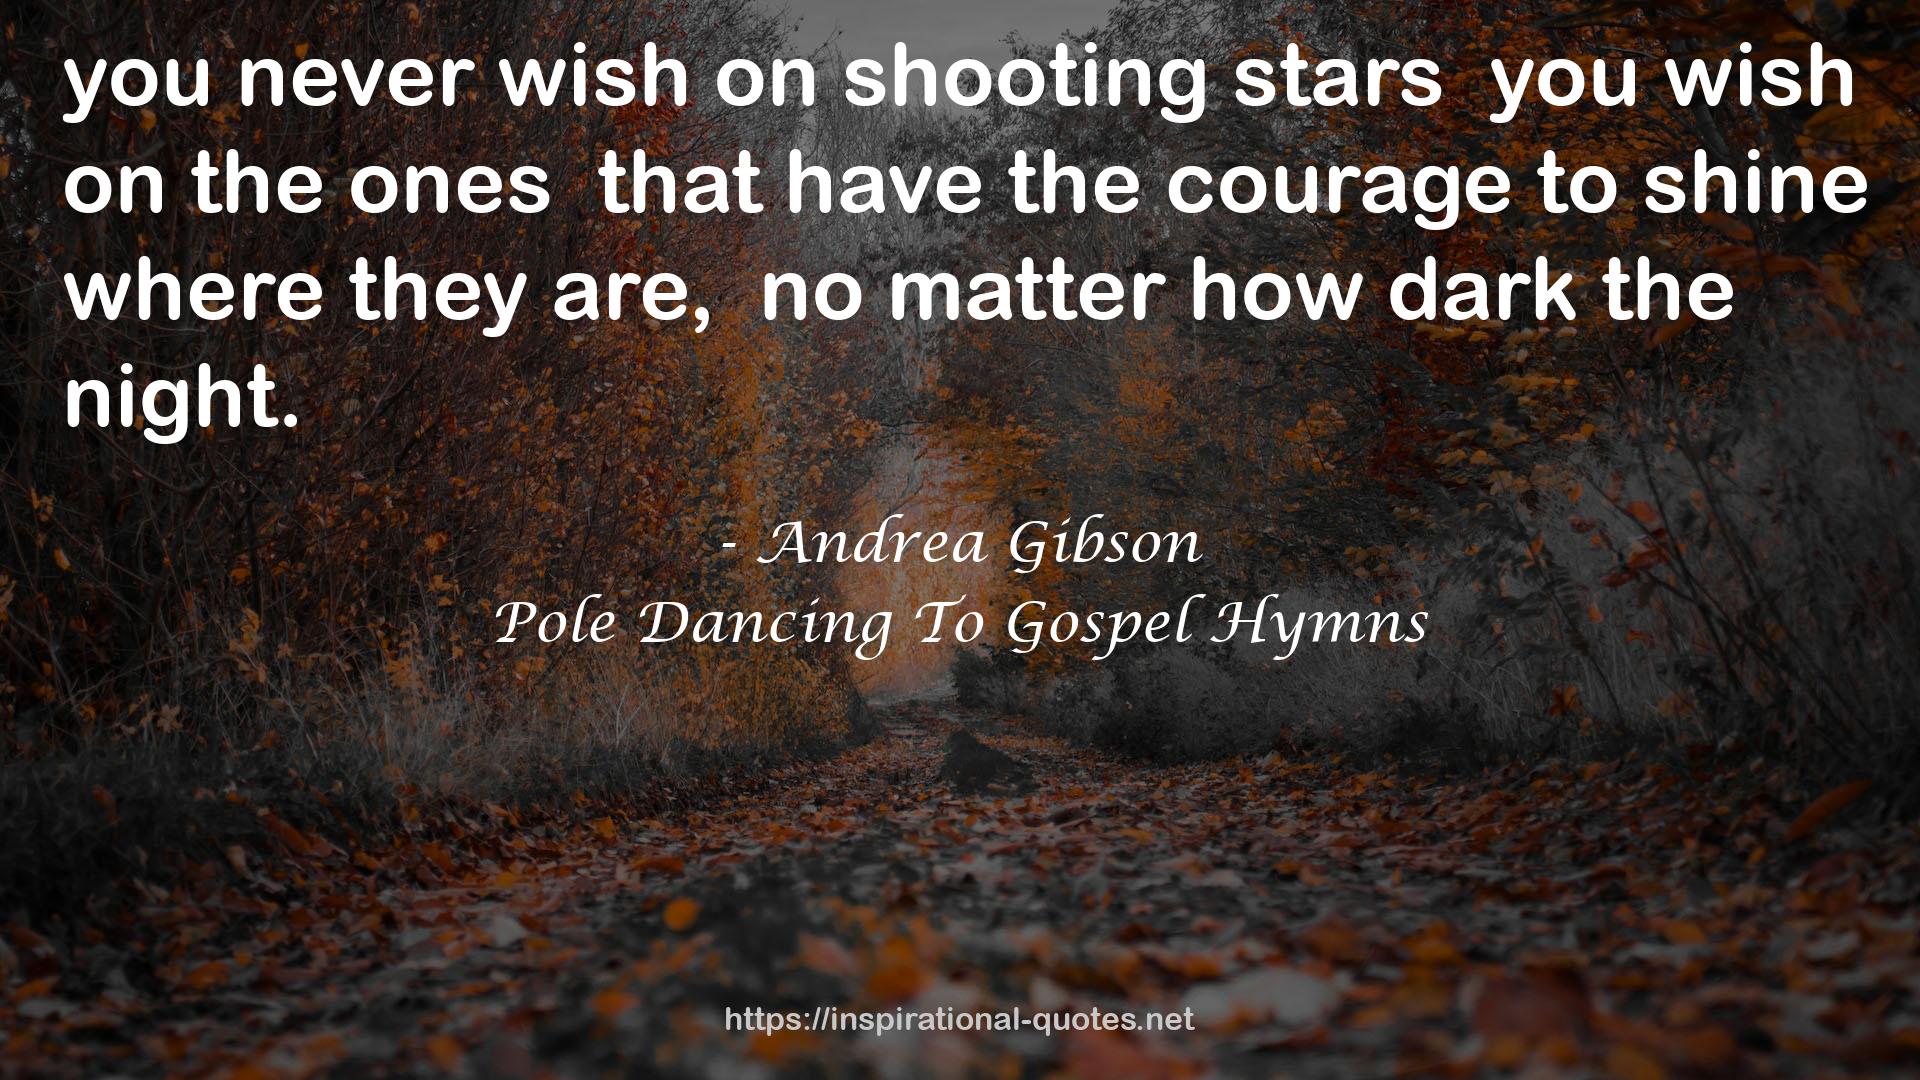 Andrea Gibson QUOTES